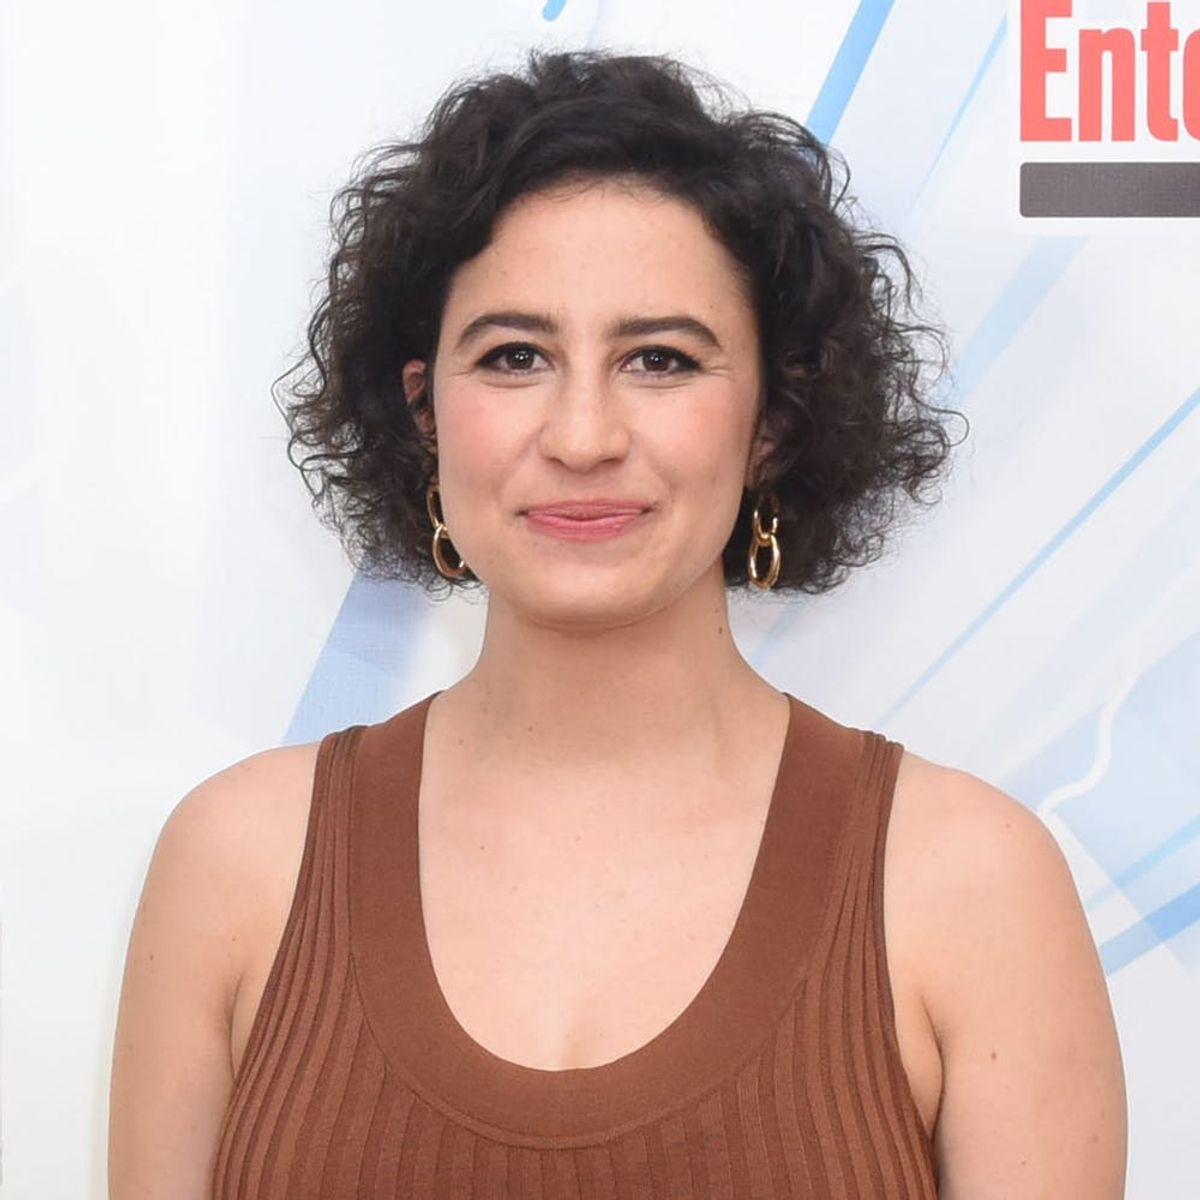 Broad City’s Ilana Glazer Is Launching an App to Help People Get Over Political Differences